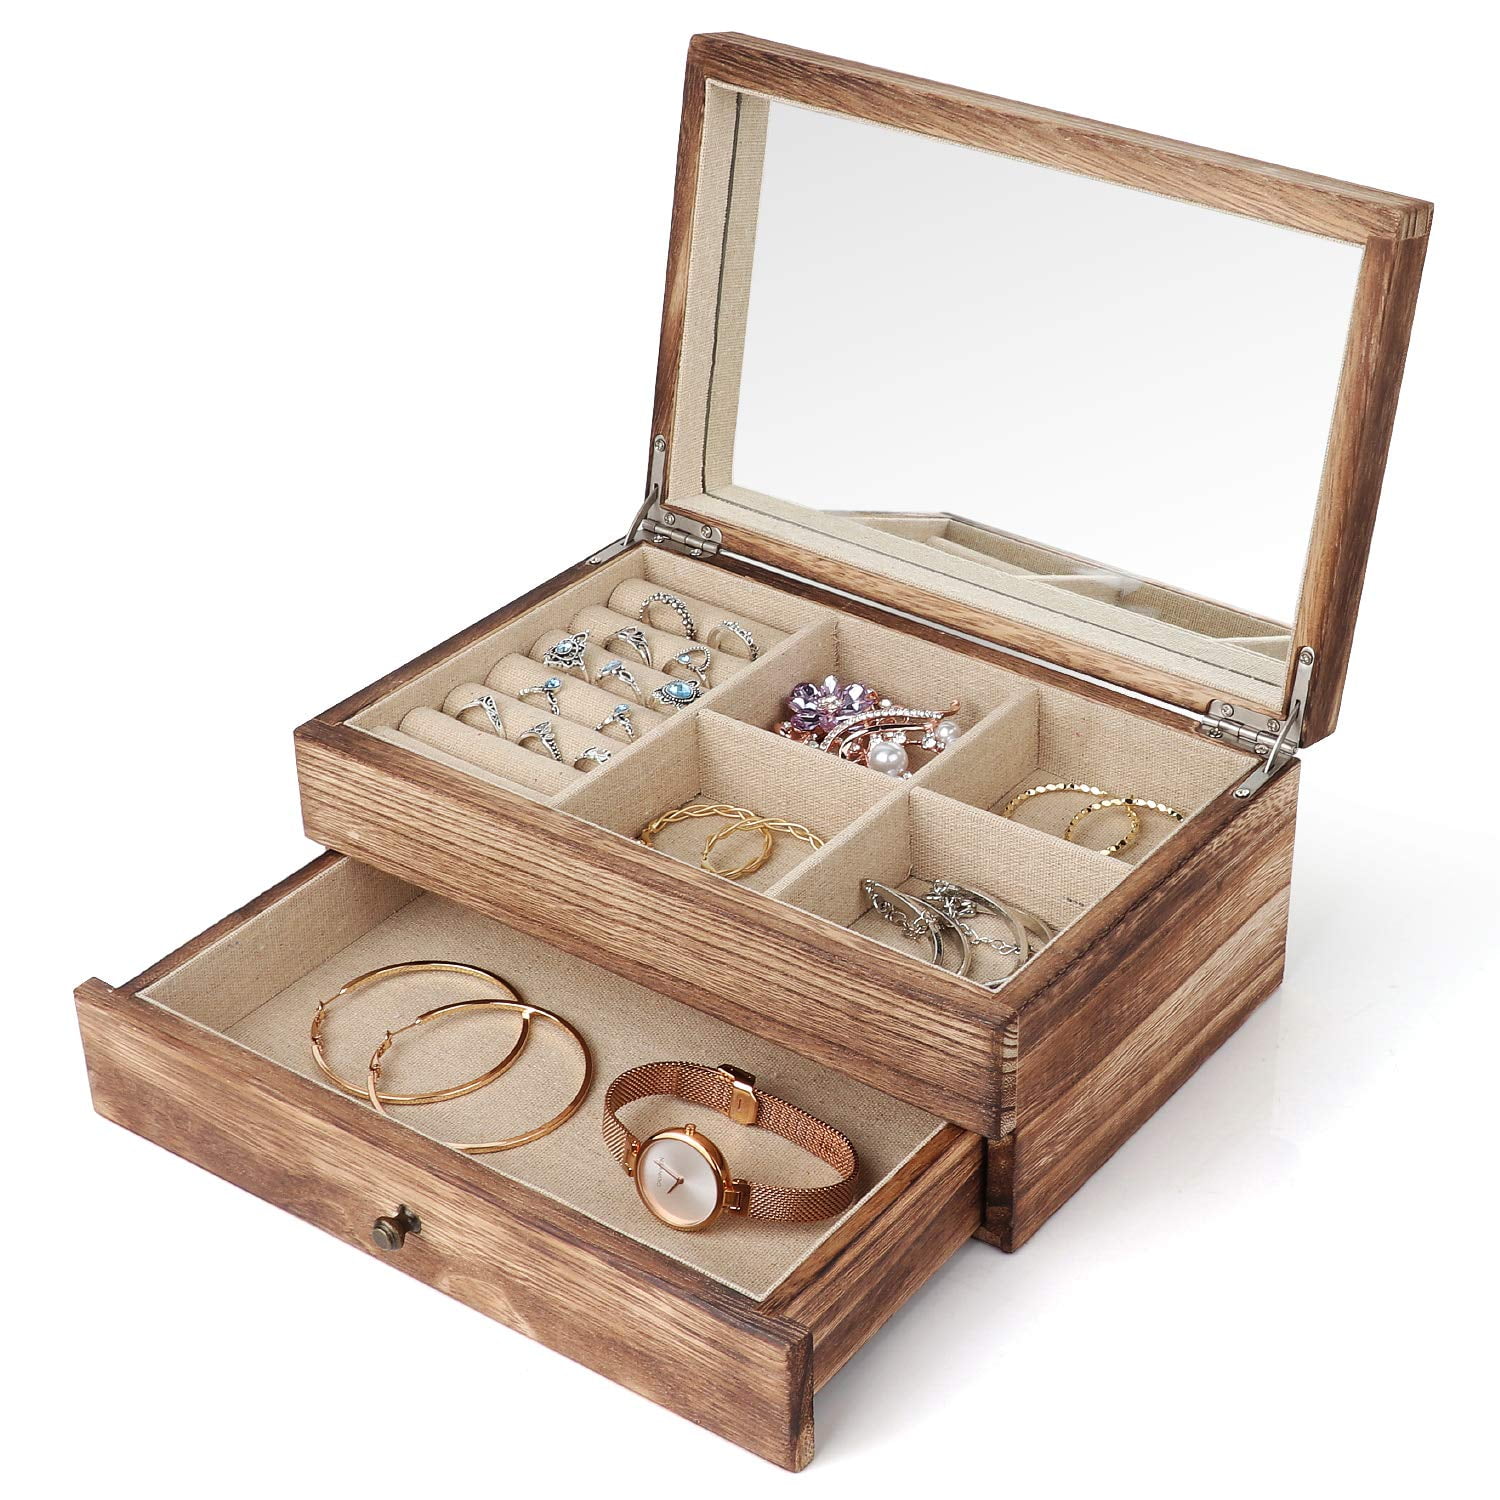 Wooden Jewelry Box With 3 Expandable Jewelry Boxes, Jewelry